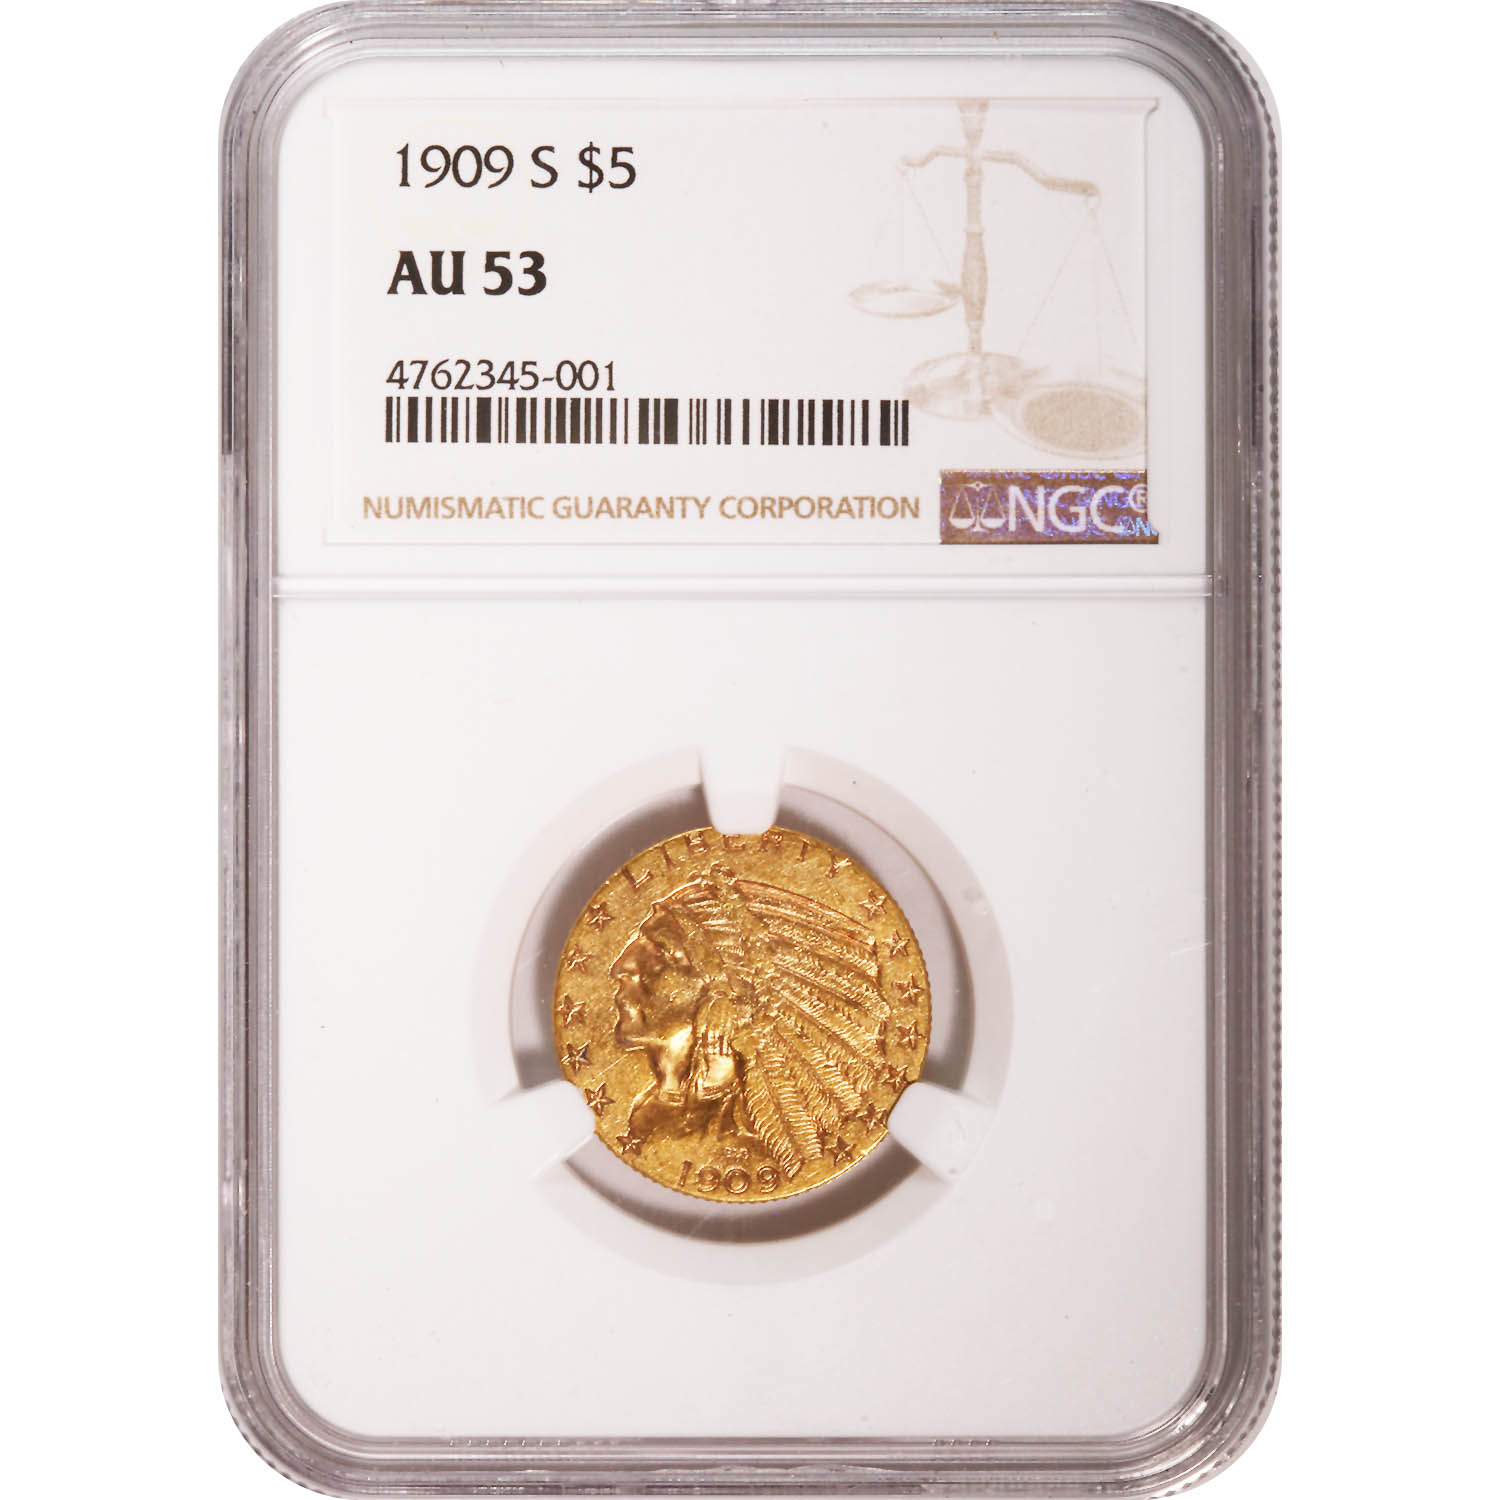 Certified $5 Gold Indian 1909-S AU53 NGC